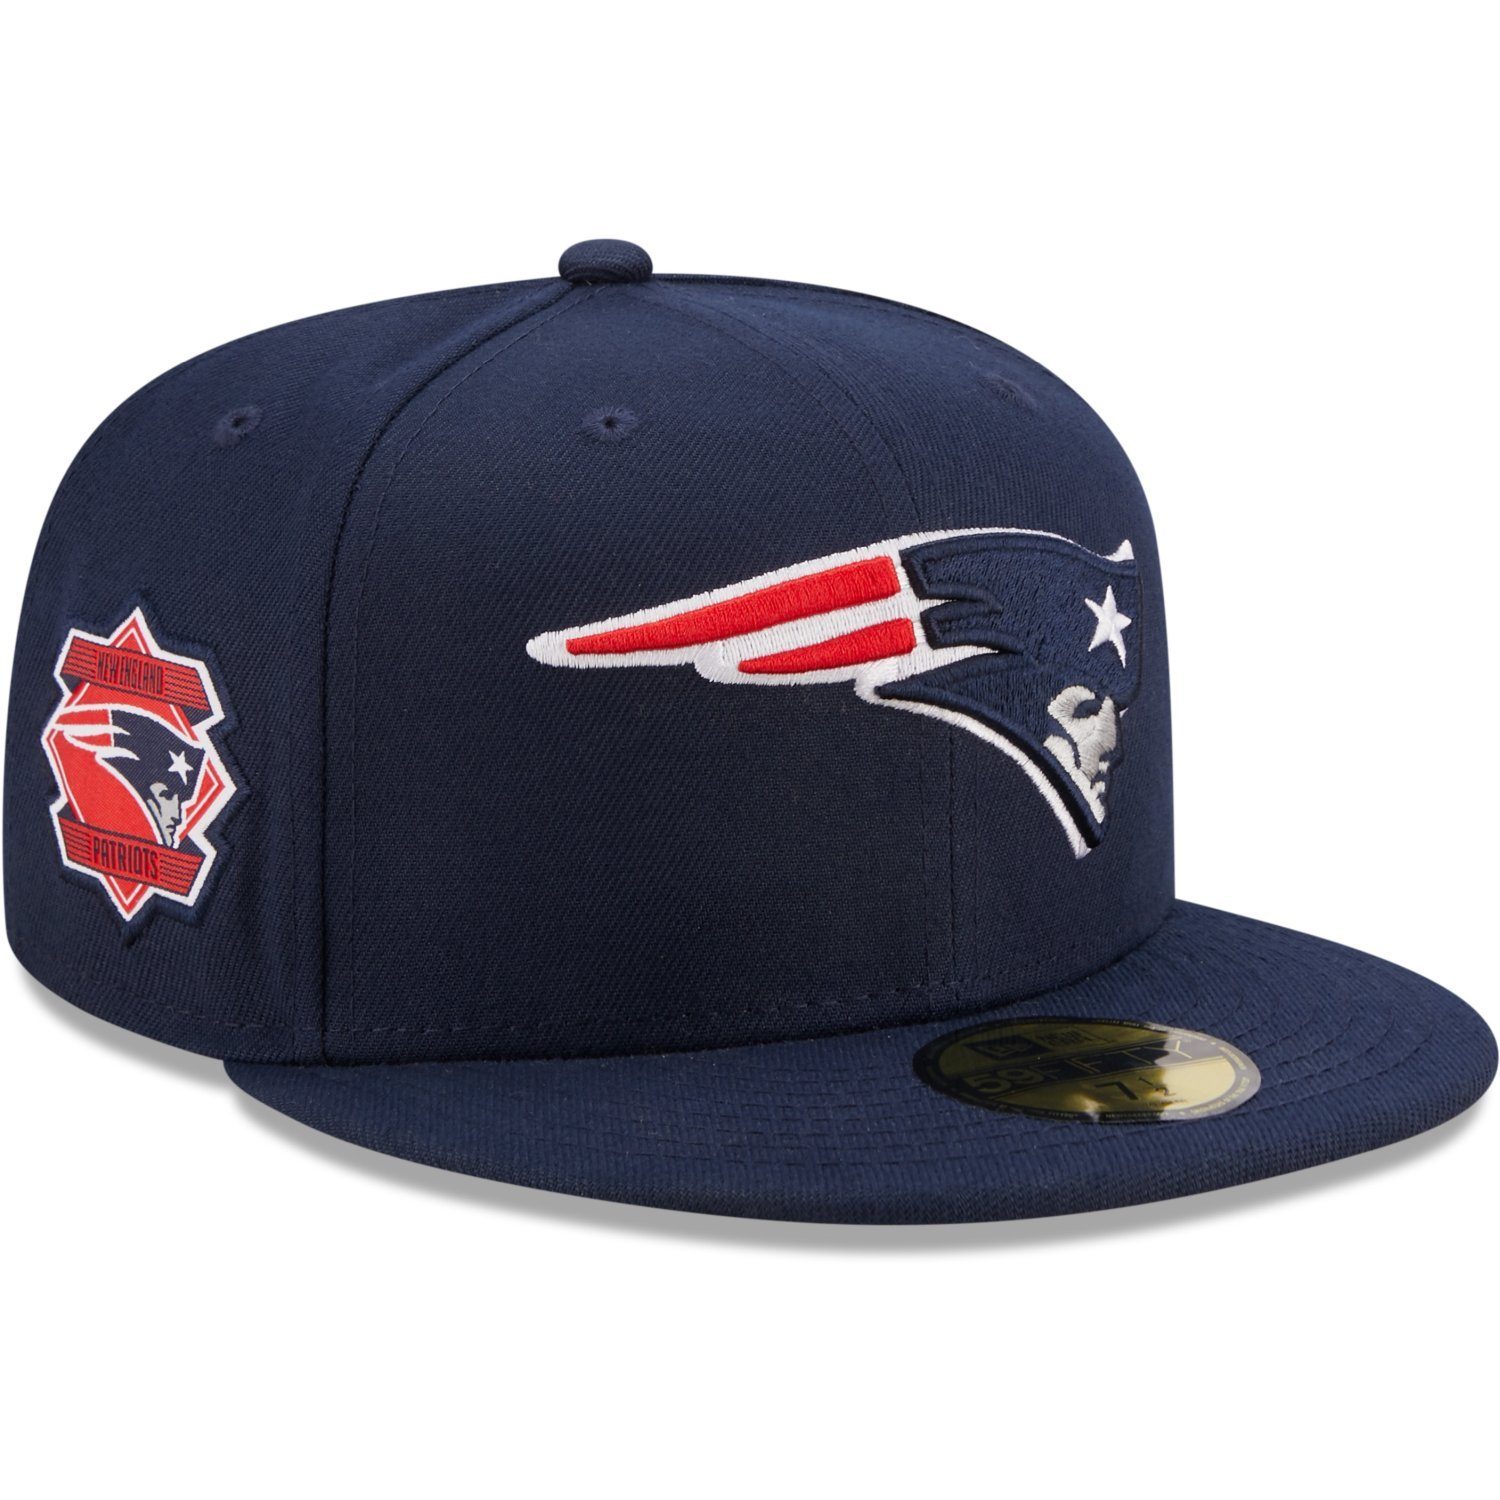 New SIDE Fitted Patriots Cap New England Era 59Fifty PATCH